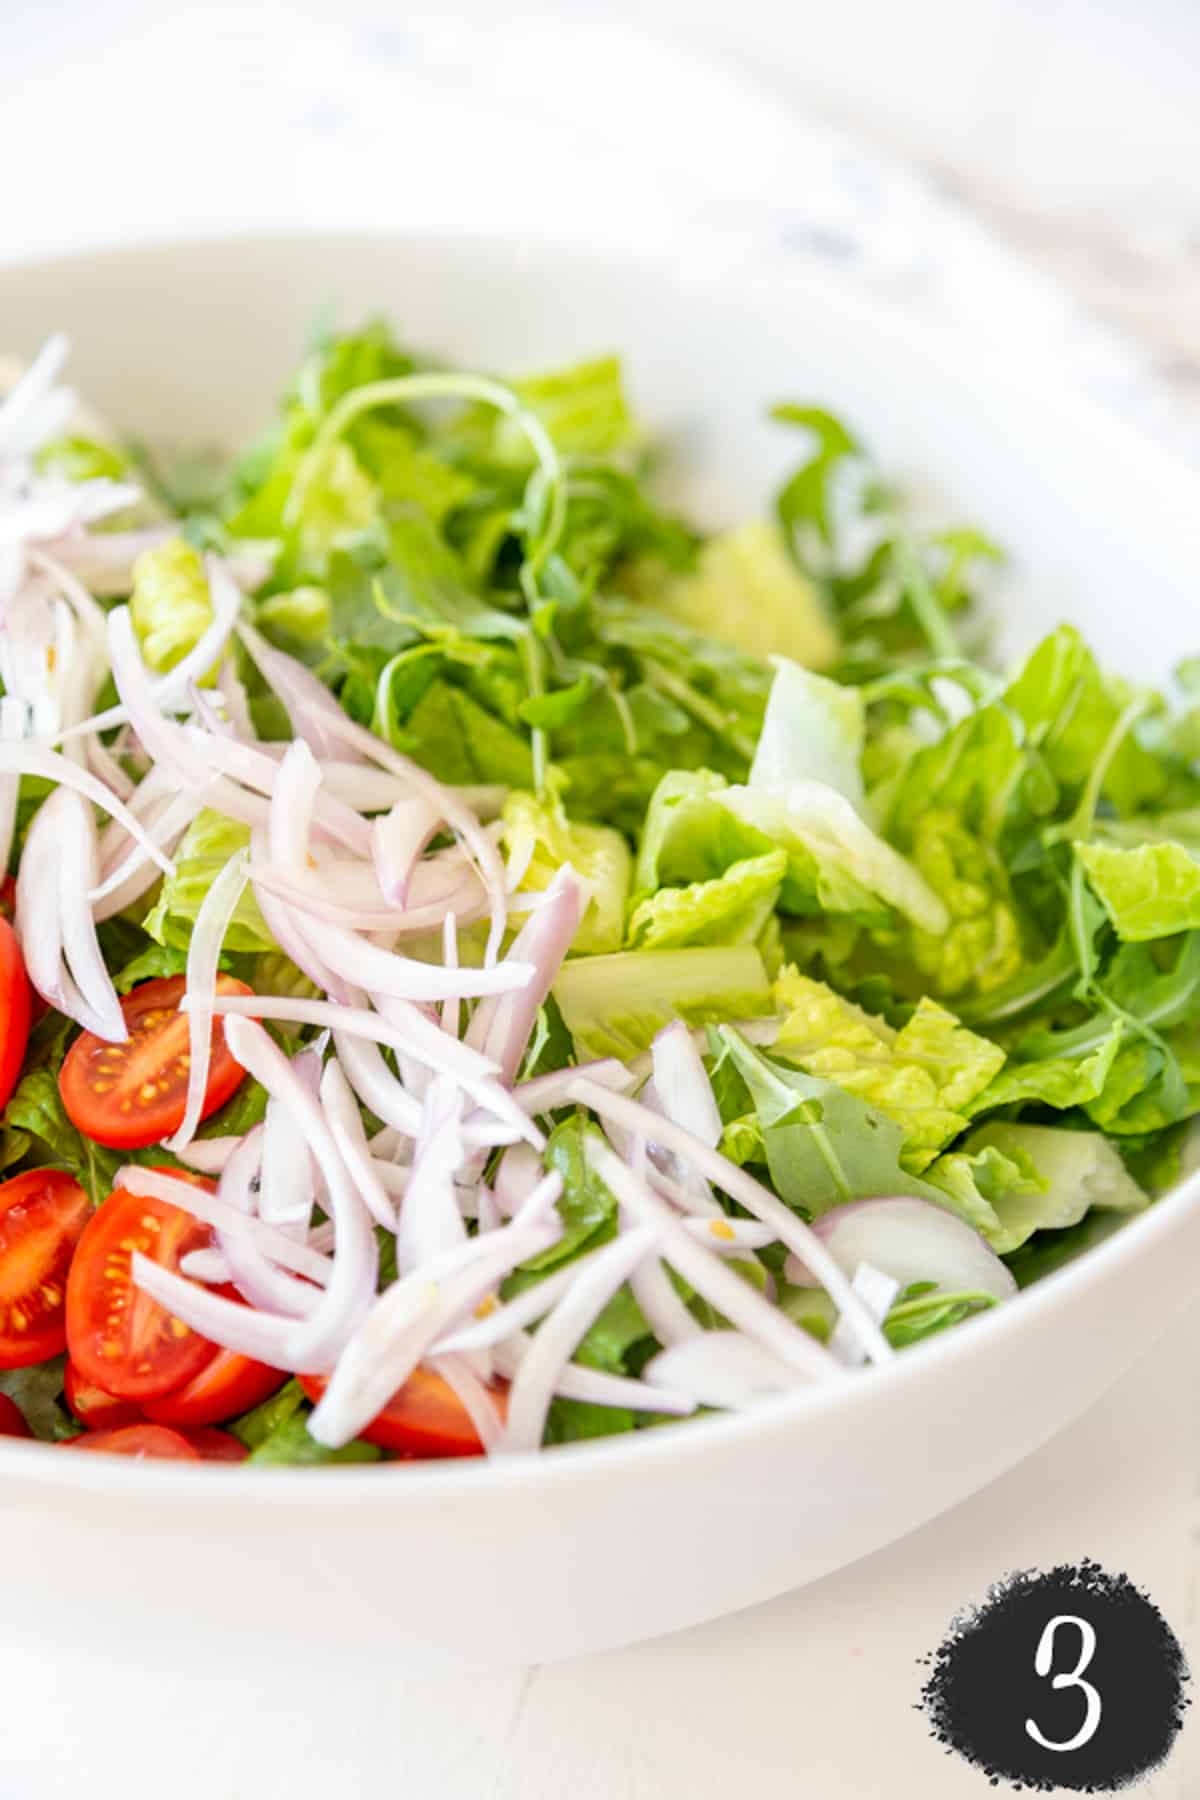 A white salad bowl with lettuce, tomatoes, and slivered onions.